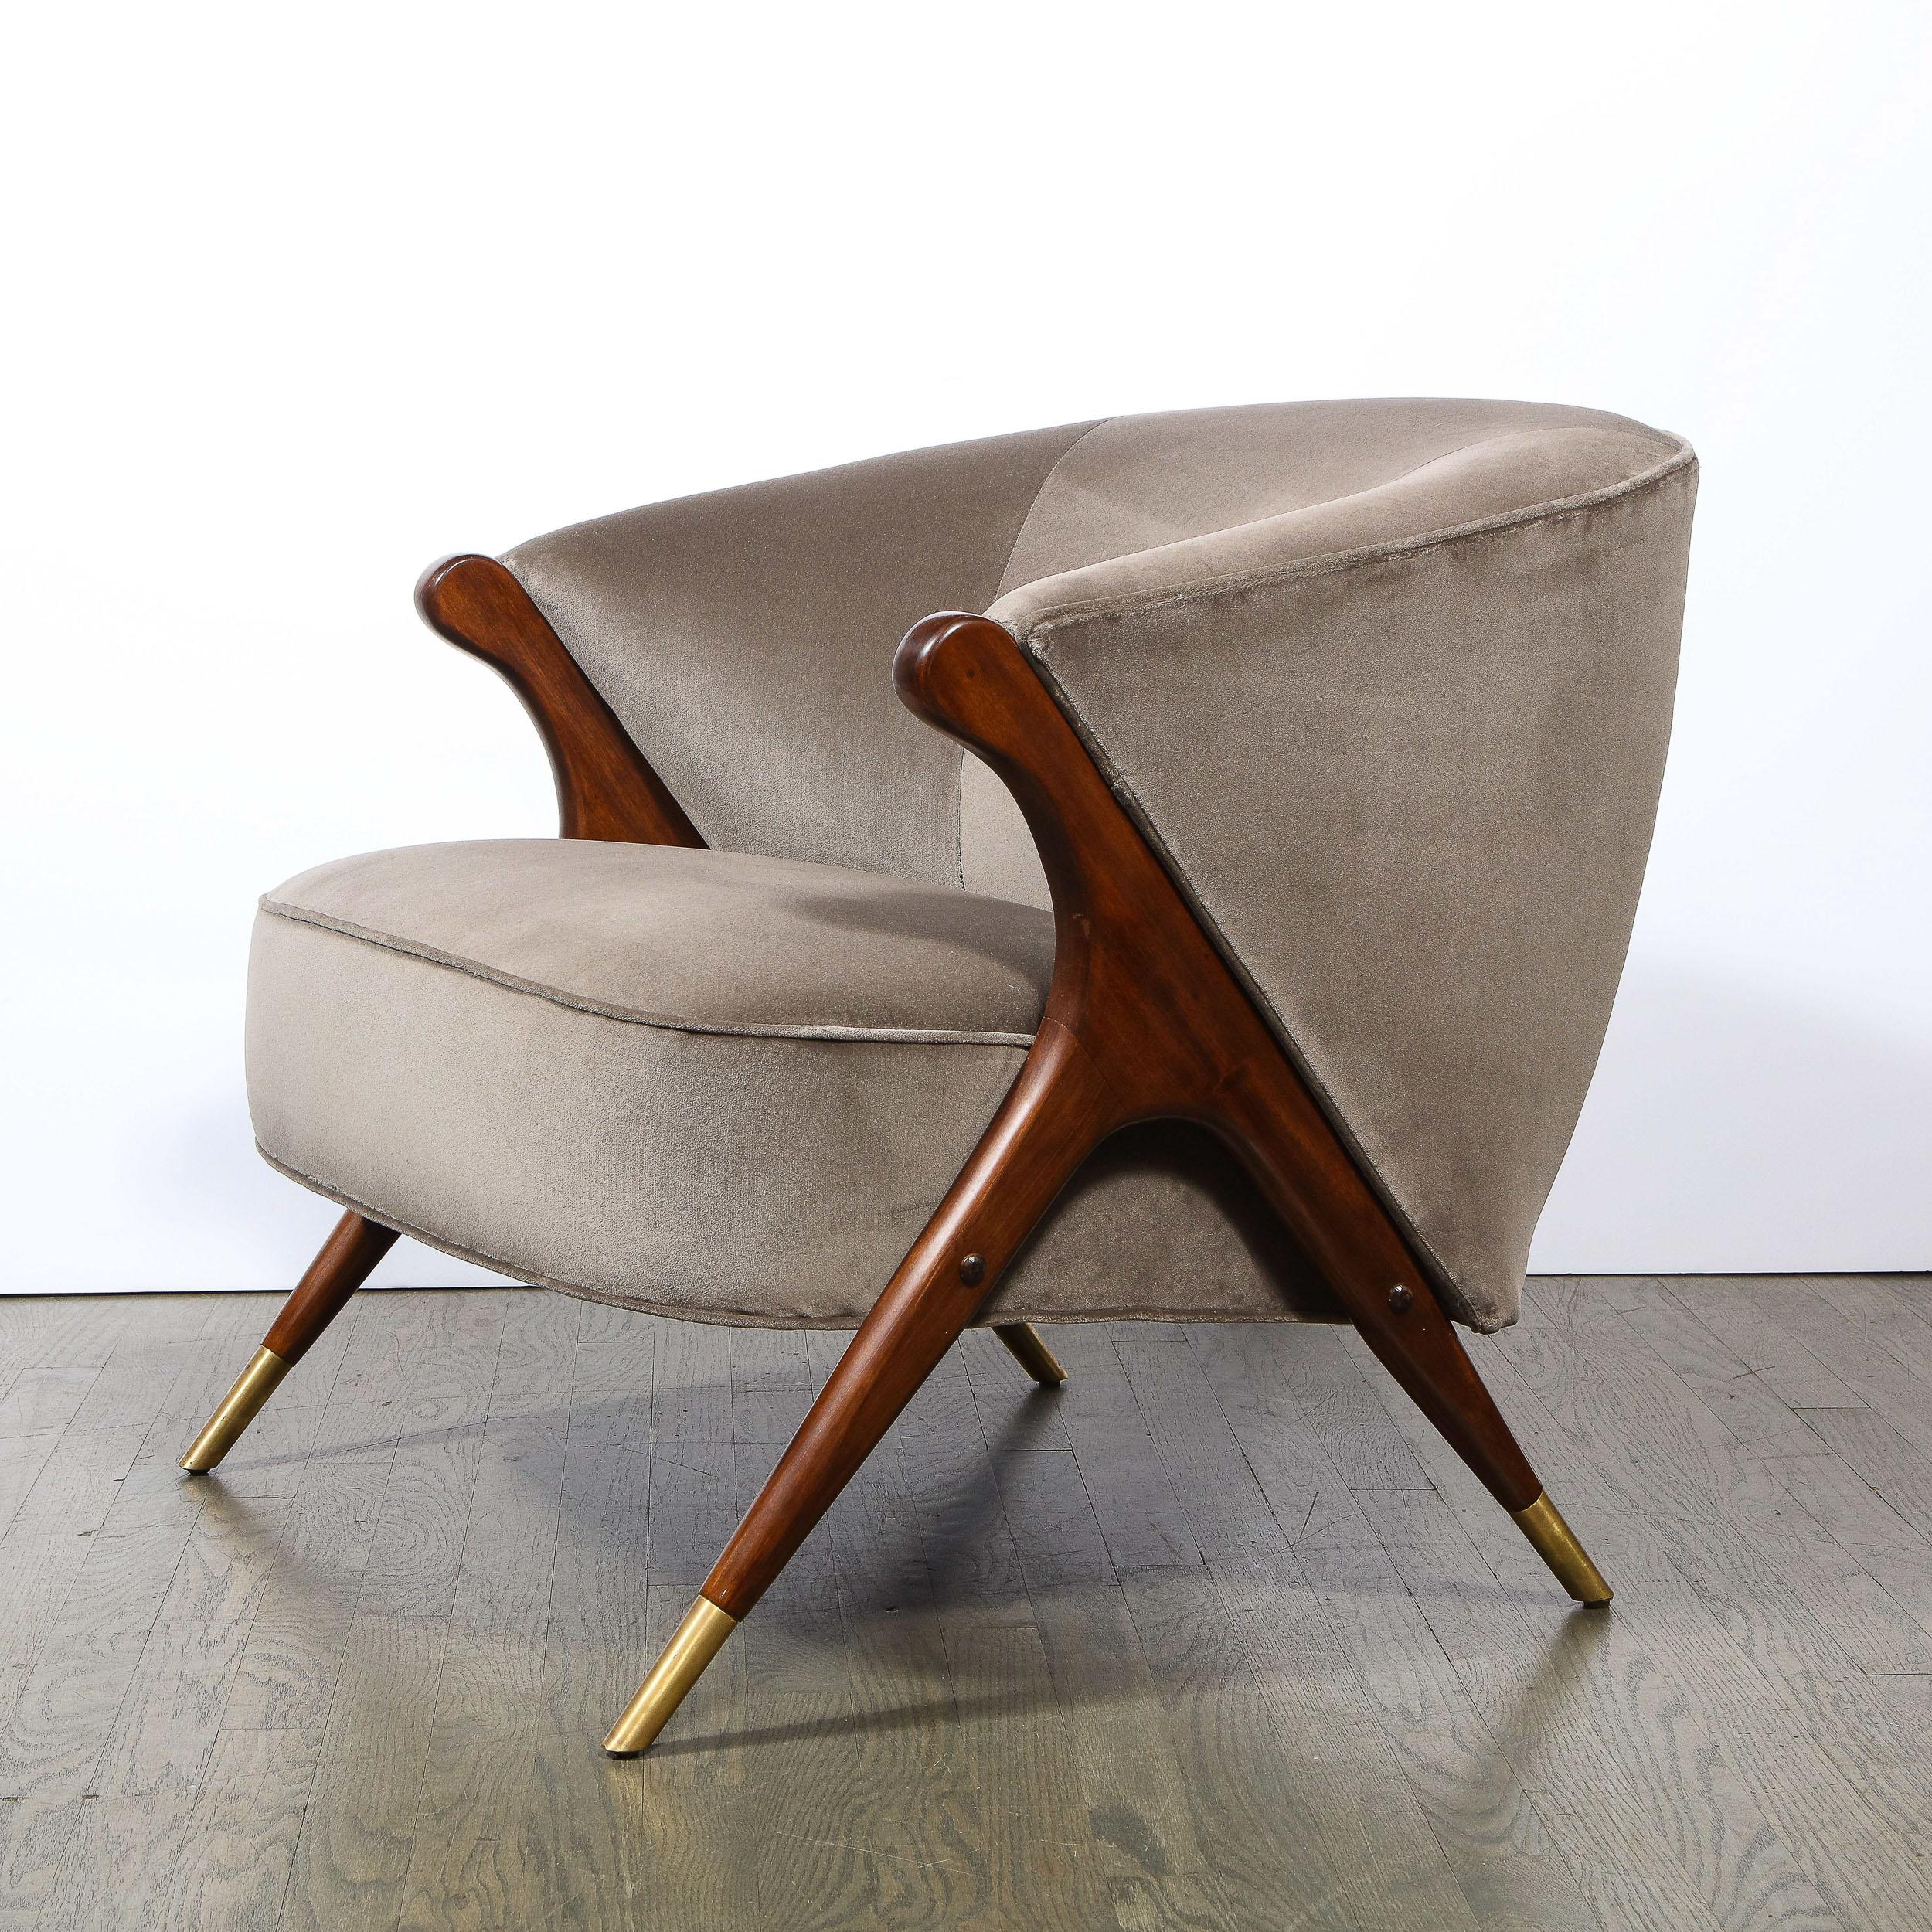 This stunning and understated lounge chair realized by the esteemed Karpen of California, circa 1960. It features splayed legs in walnut resting on conical brass sabots. The legs adjoin at a curvilinear wishbone joint, continuing their angled ascent